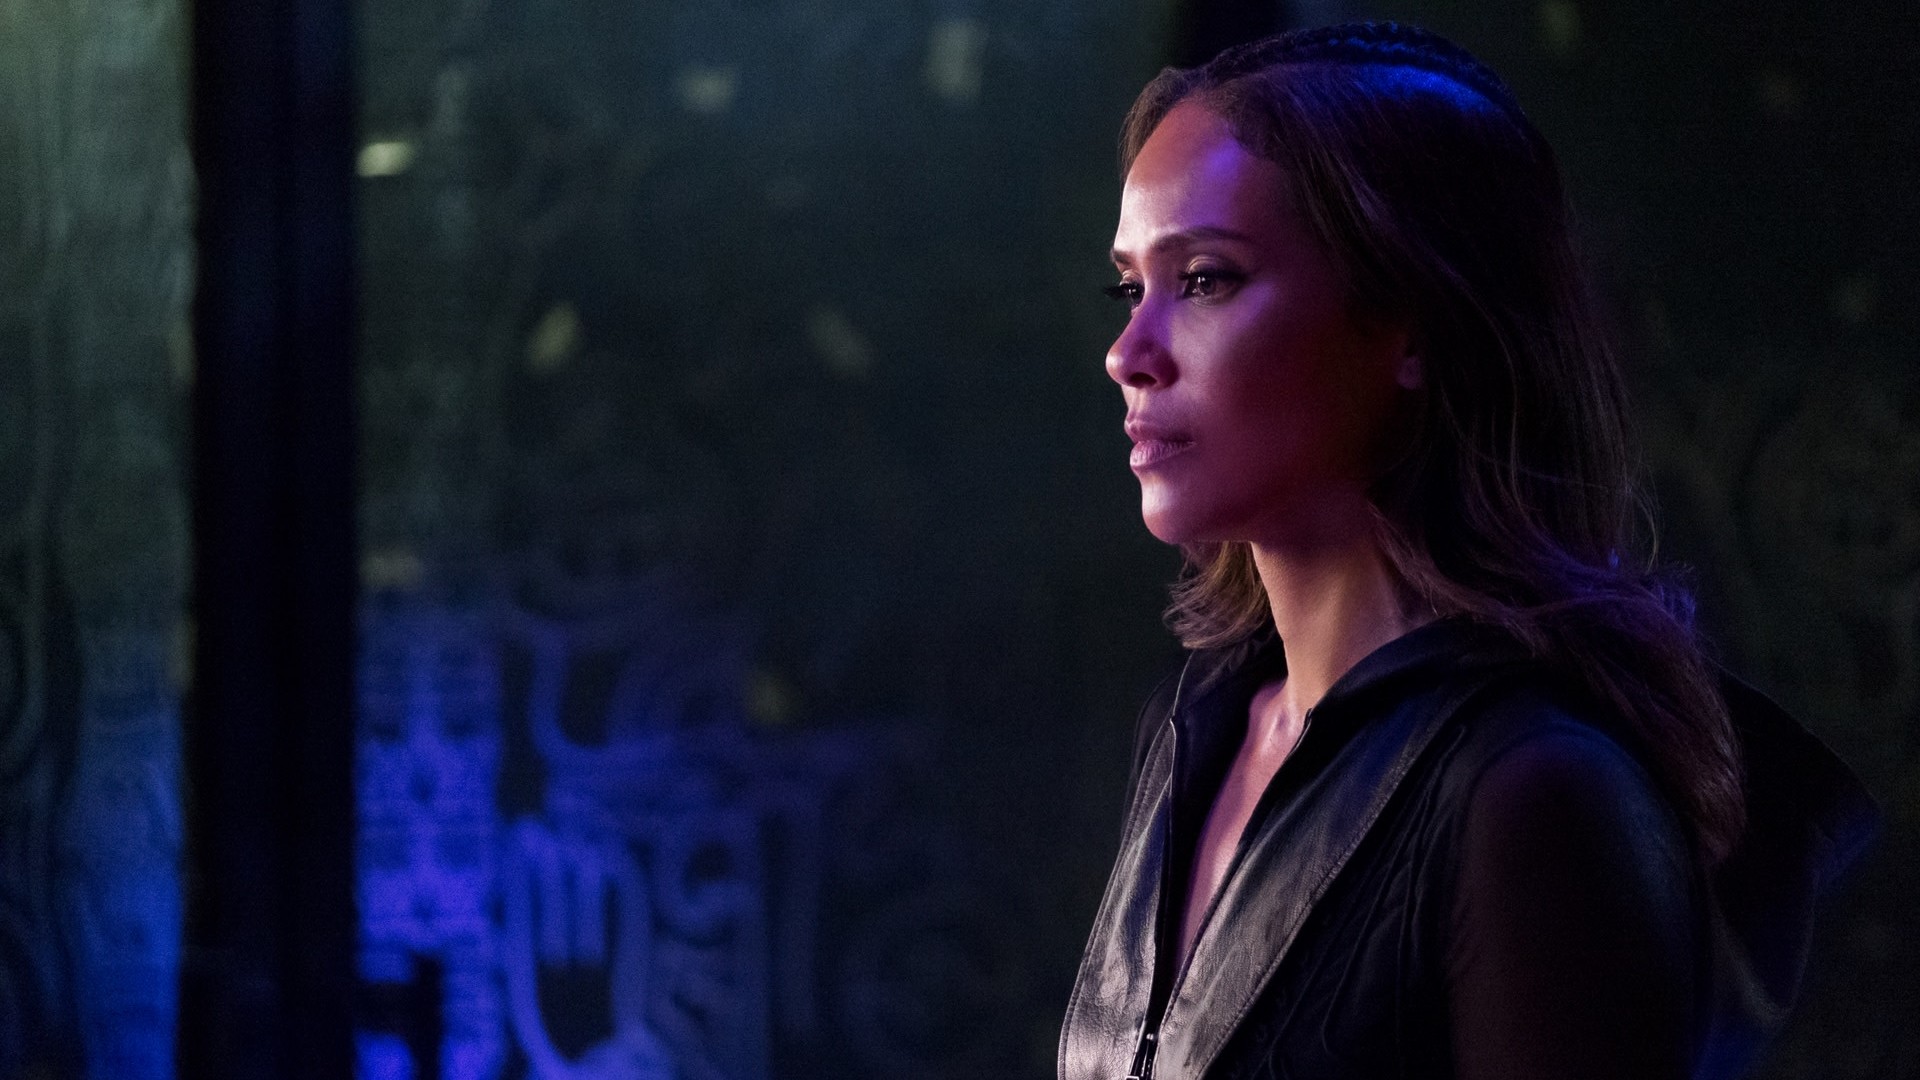 Mazikeen (Lesley-Ann Brandt), also known as Maze, probably contemplating how to end someone who's pissed her off. (Photo: John P. Fleenor/Netflix)